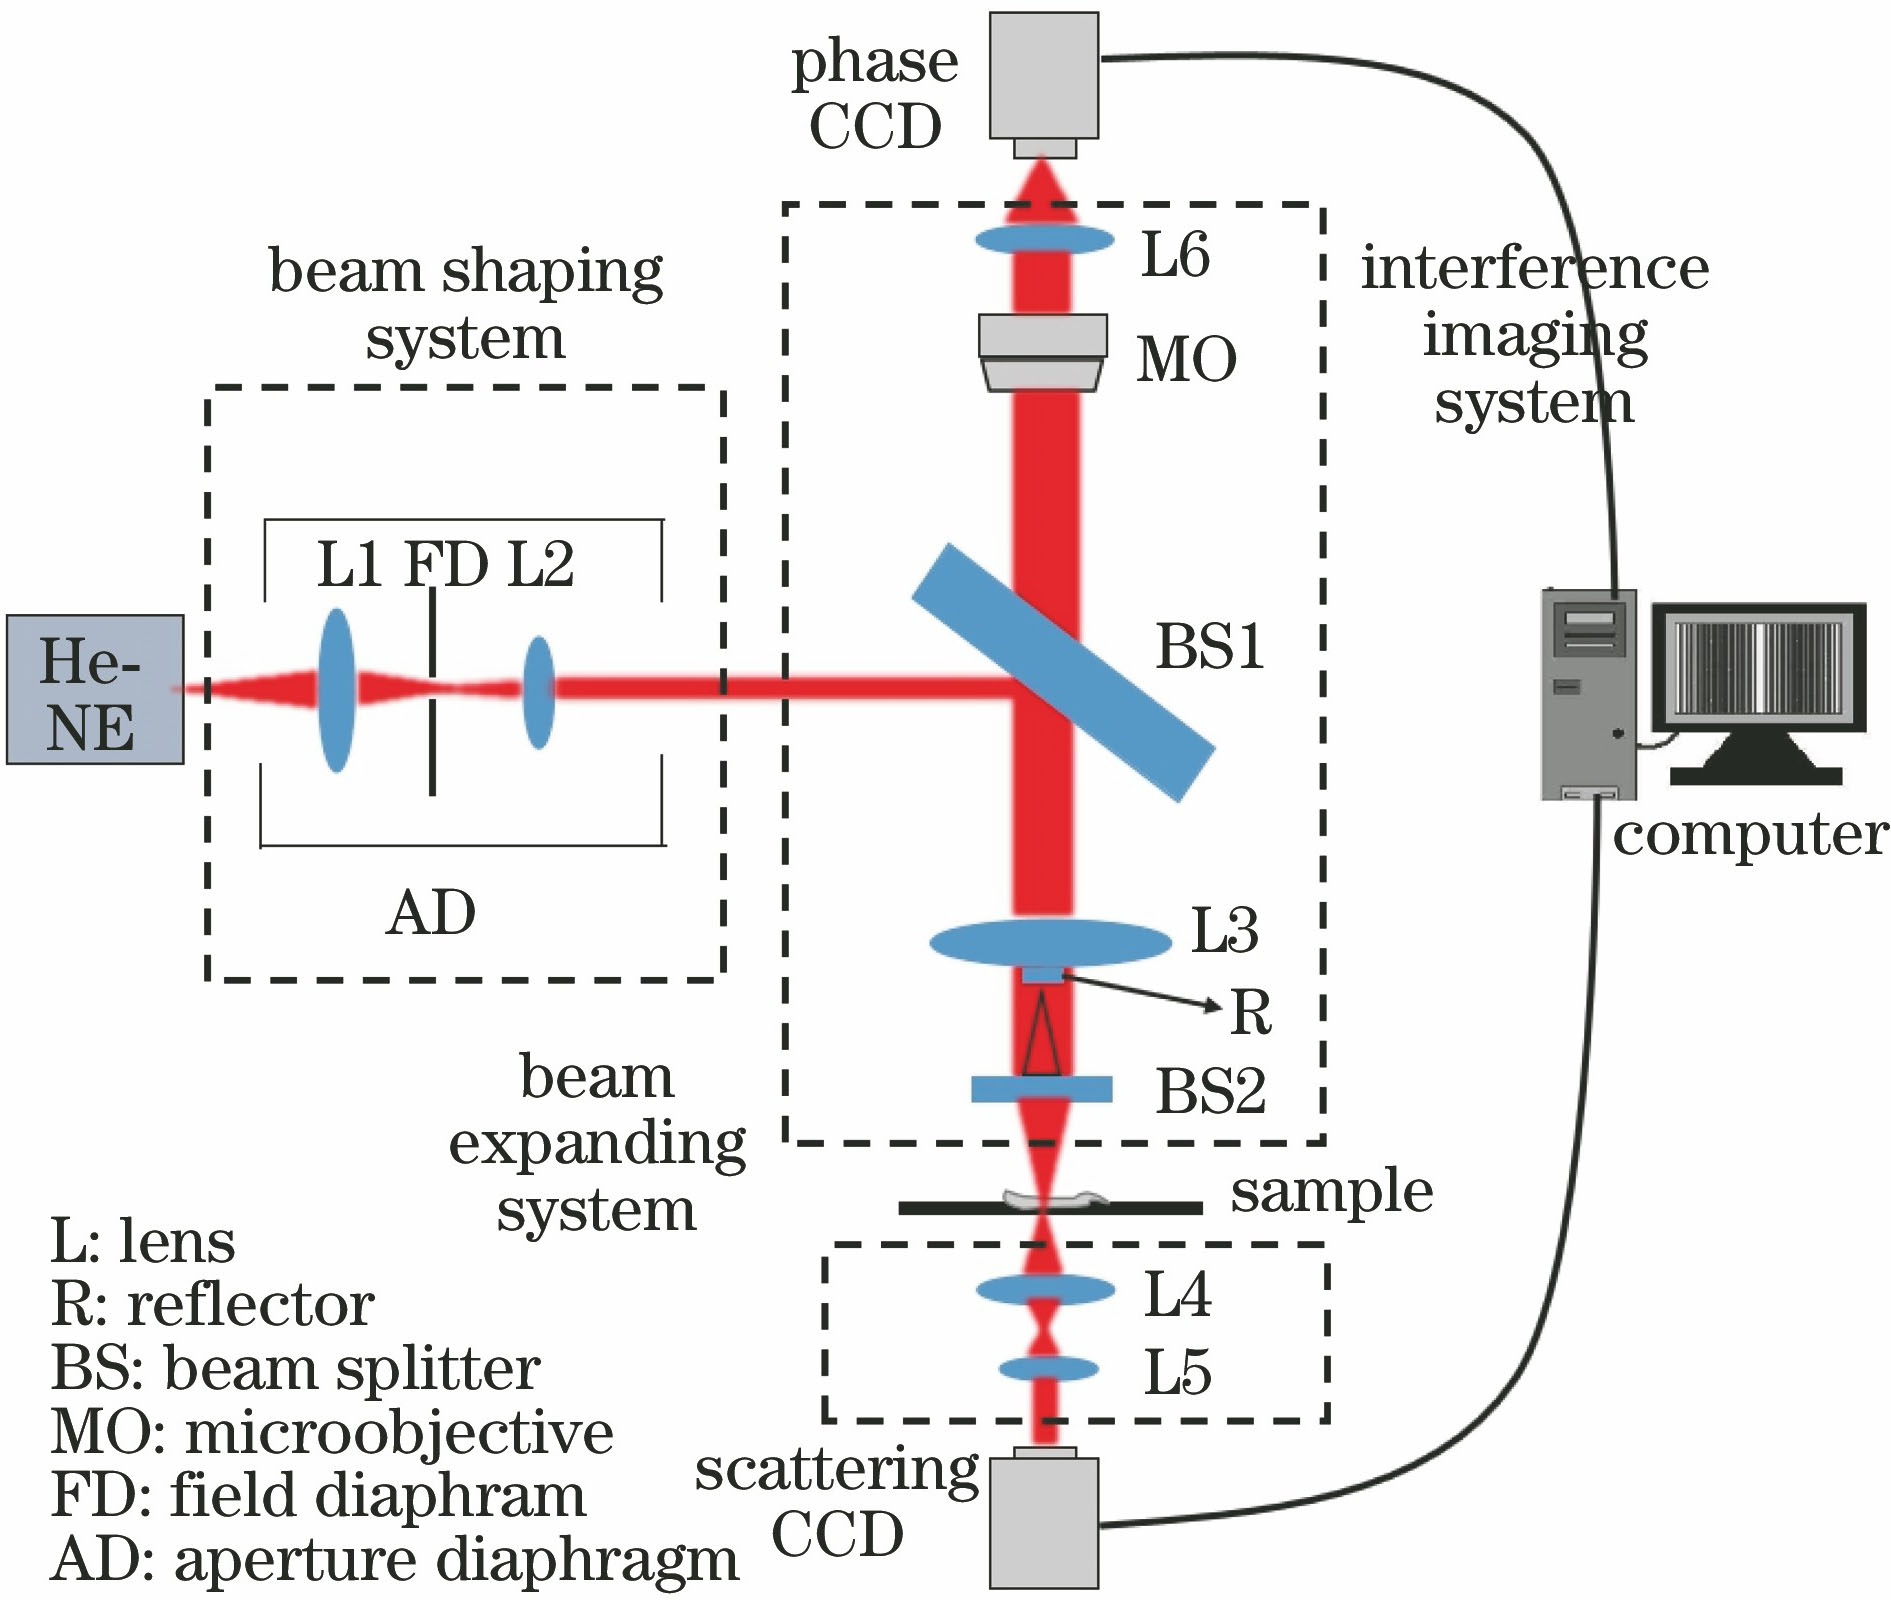 Schematic of biological cell phase imaging system integrated with optical scattering information